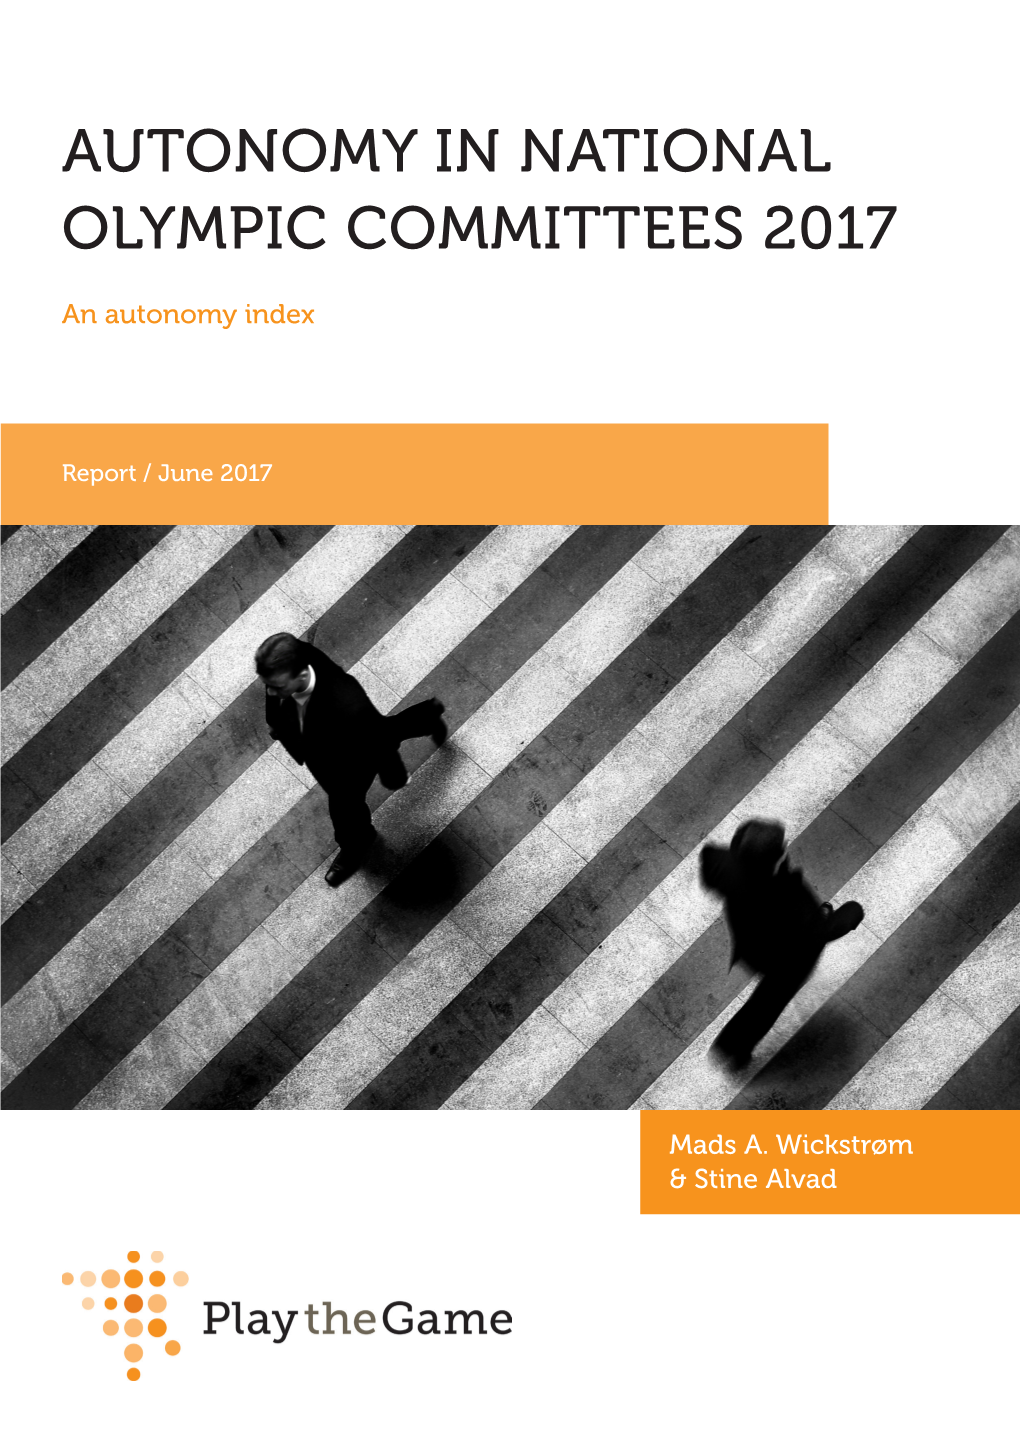 Autonomy in National Olympic Committees 2017